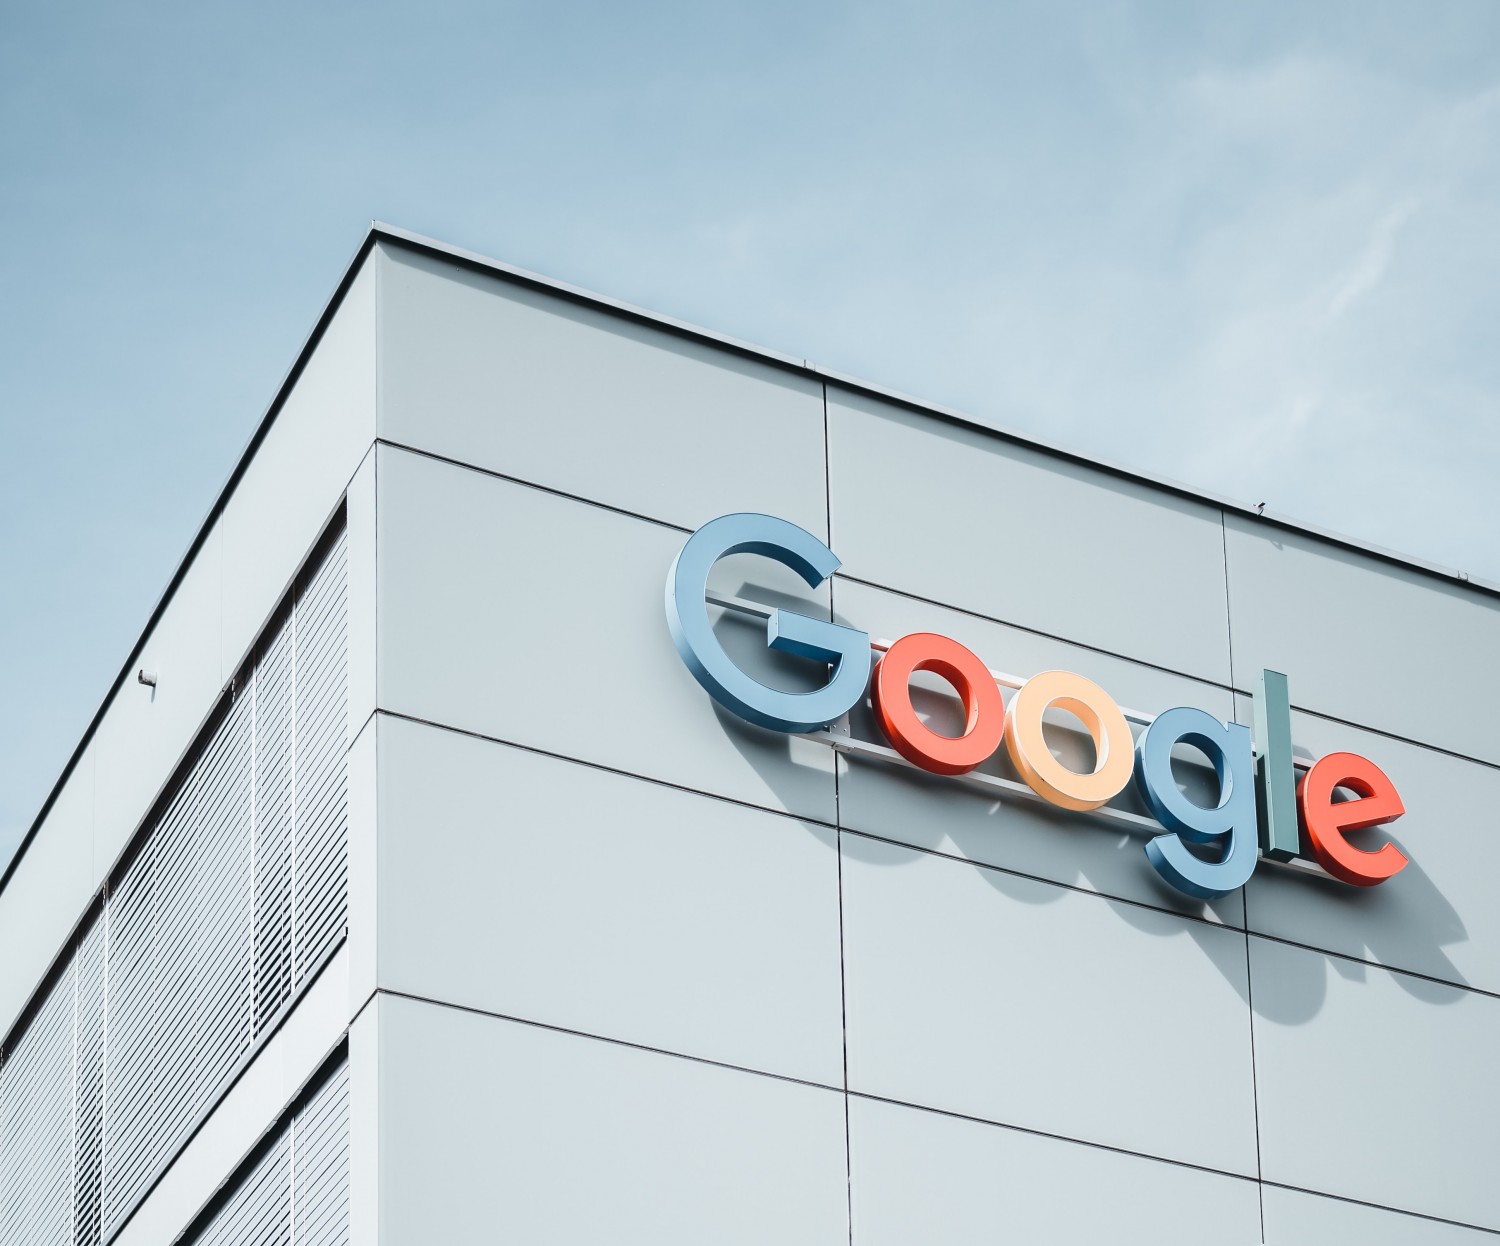 Indian Govt to Take Action Against Google Over Antitrust Breaches